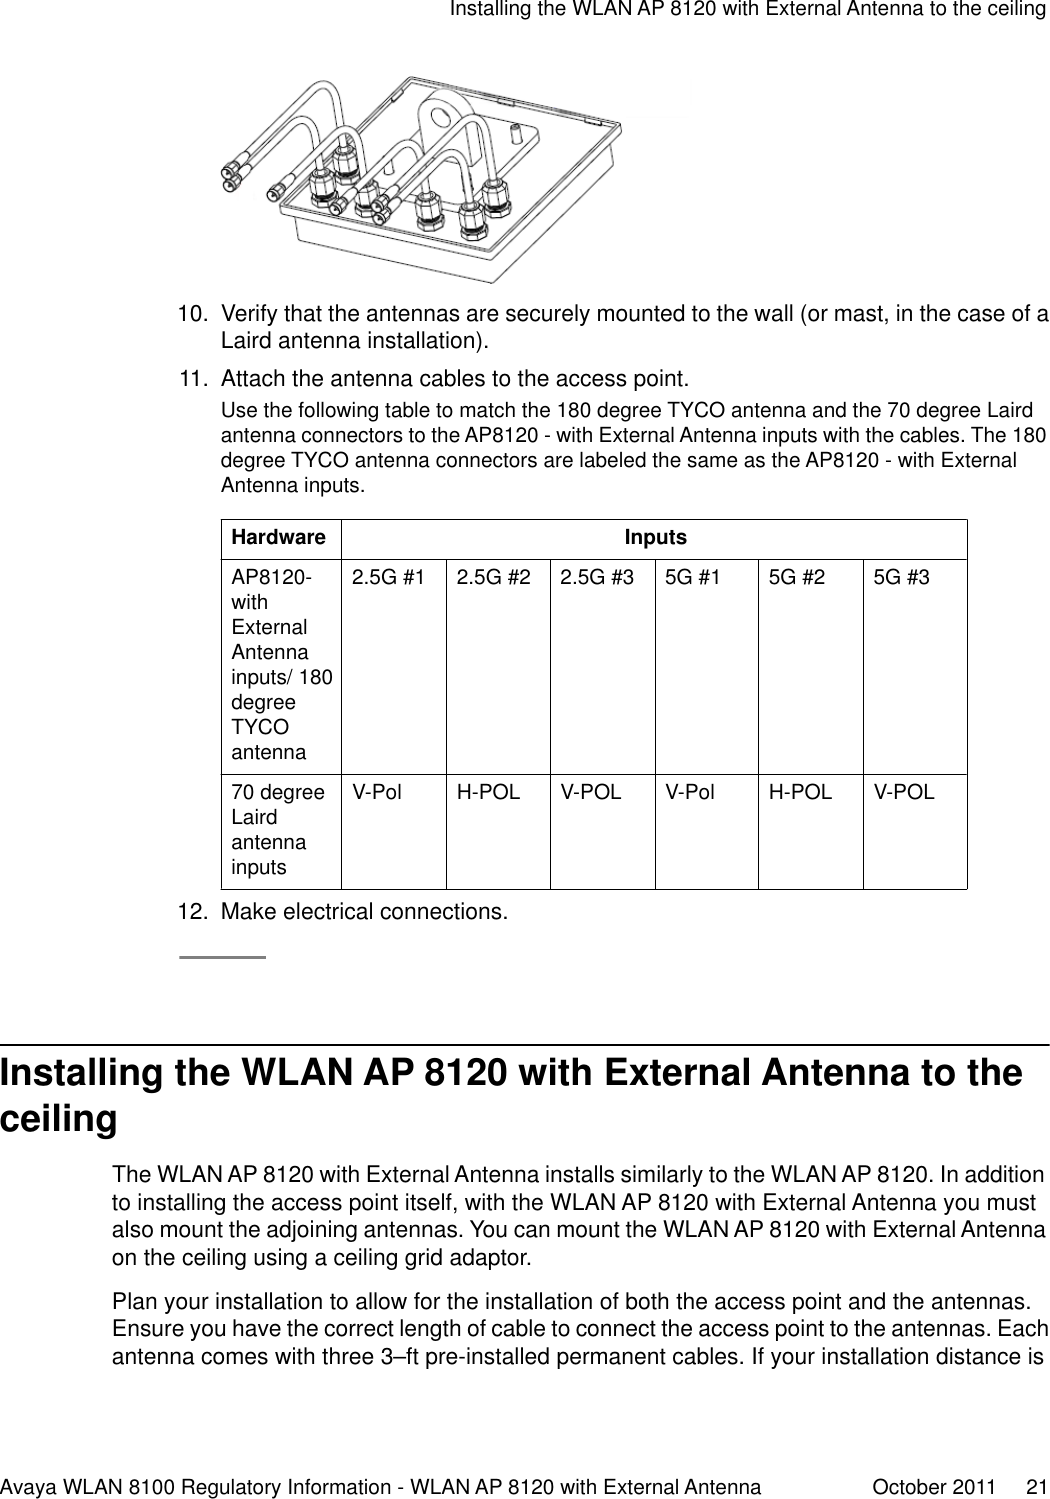 10. Verify that the antennas are securely mounted to the wall (or mast, in the case of aLaird antenna installation).11. Attach the antenna cables to the access point.Use the following table to match the 180 degree TYCO antenna and the 70 degree Lairdantenna connectors to the AP8120 - with External Antenna inputs with the cables. The 180degree TYCO antenna connectors are labeled the same as the AP8120 - with ExternalAntenna inputs.Hardware InputsAP8120-withExternalAntennainputs/ 180degreeTYCOantenna2.5G #1 2.5G #2 2.5G #3 5G #1 5G #2 5G #370 degreeLairdantennainputsV-Pol H-POL V-POL V-Pol H-POL V-POL12. Make electrical connections.Installing the WLAN AP 8120 with External Antenna to theceilingThe WLAN AP 8120 with External Antenna installs similarly to the WLAN AP 8120. In additionto installing the access point itself, with the WLAN AP 8120 with External Antenna you mustalso mount the adjoining antennas. You can mount the WLAN AP 8120 with External Antennaon the ceiling using a ceiling grid adaptor.Plan your installation to allow for the installation of both the access point and the antennas.Ensure you have the correct length of cable to connect the access point to the antennas. Eachantenna comes with three 3–ft pre-installed permanent cables. If your installation distance isInstalling the WLAN AP 8120 with External Antenna to the ceilingAvaya WLAN 8100 Regulatory Information - WLAN AP 8120 with External Antenna October 2011     21